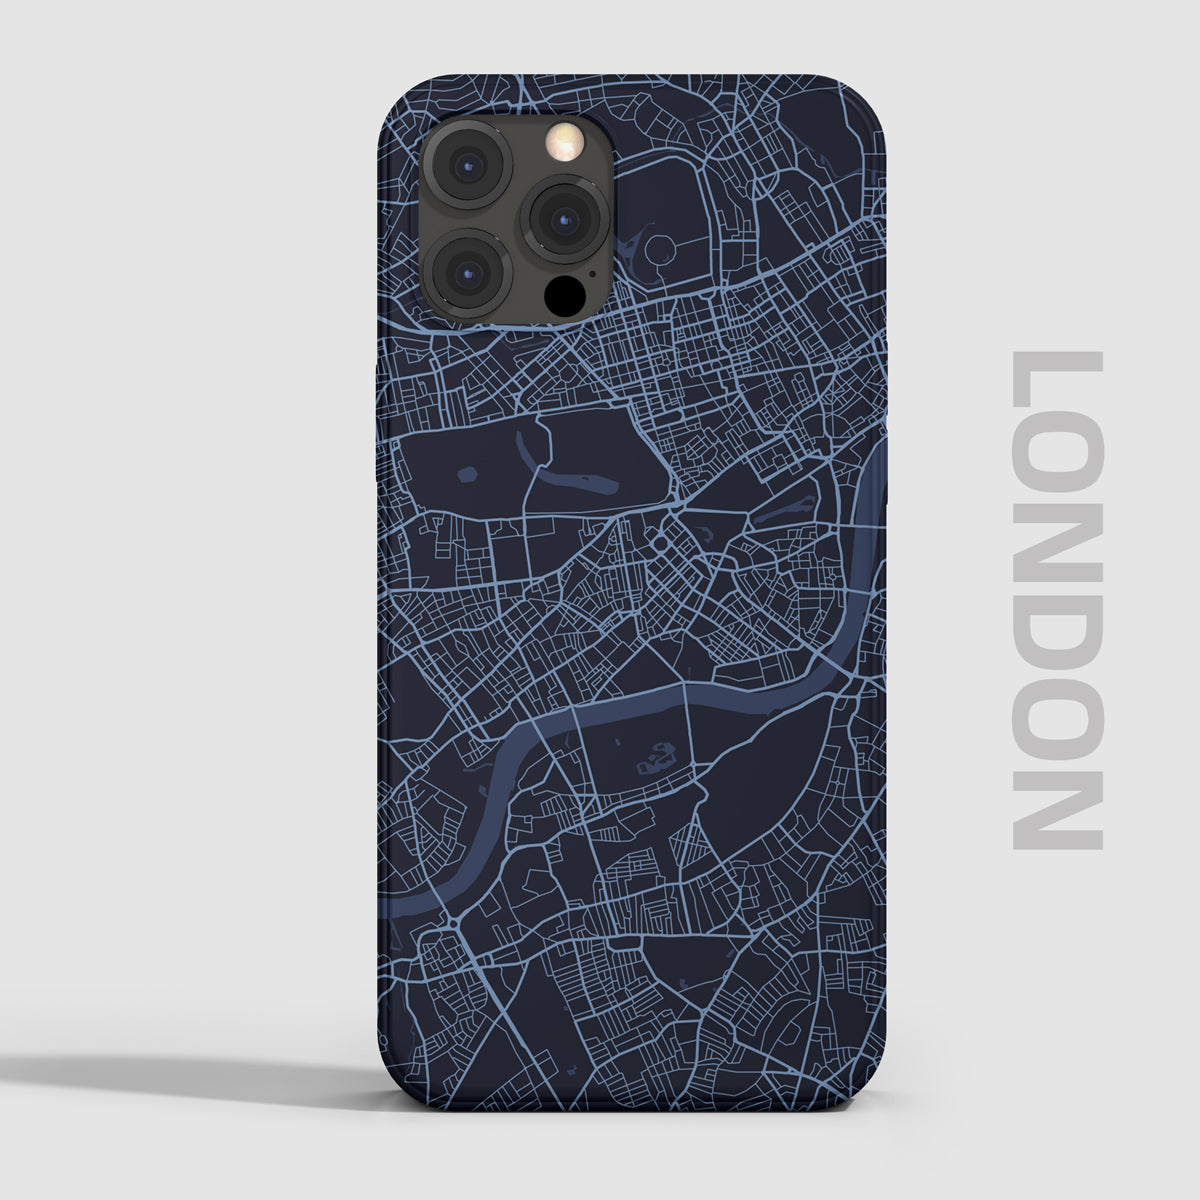 London Phone Case city map landscape. Apple Huawei XIiaomi iPhone Android Samsung